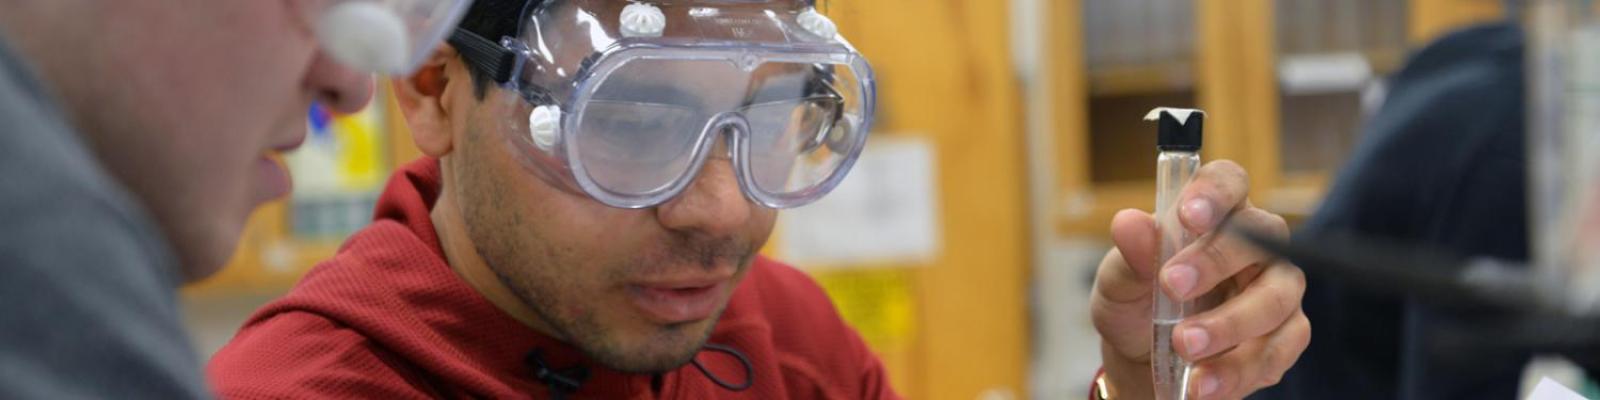 student wearing goggles performing chemistry experiment